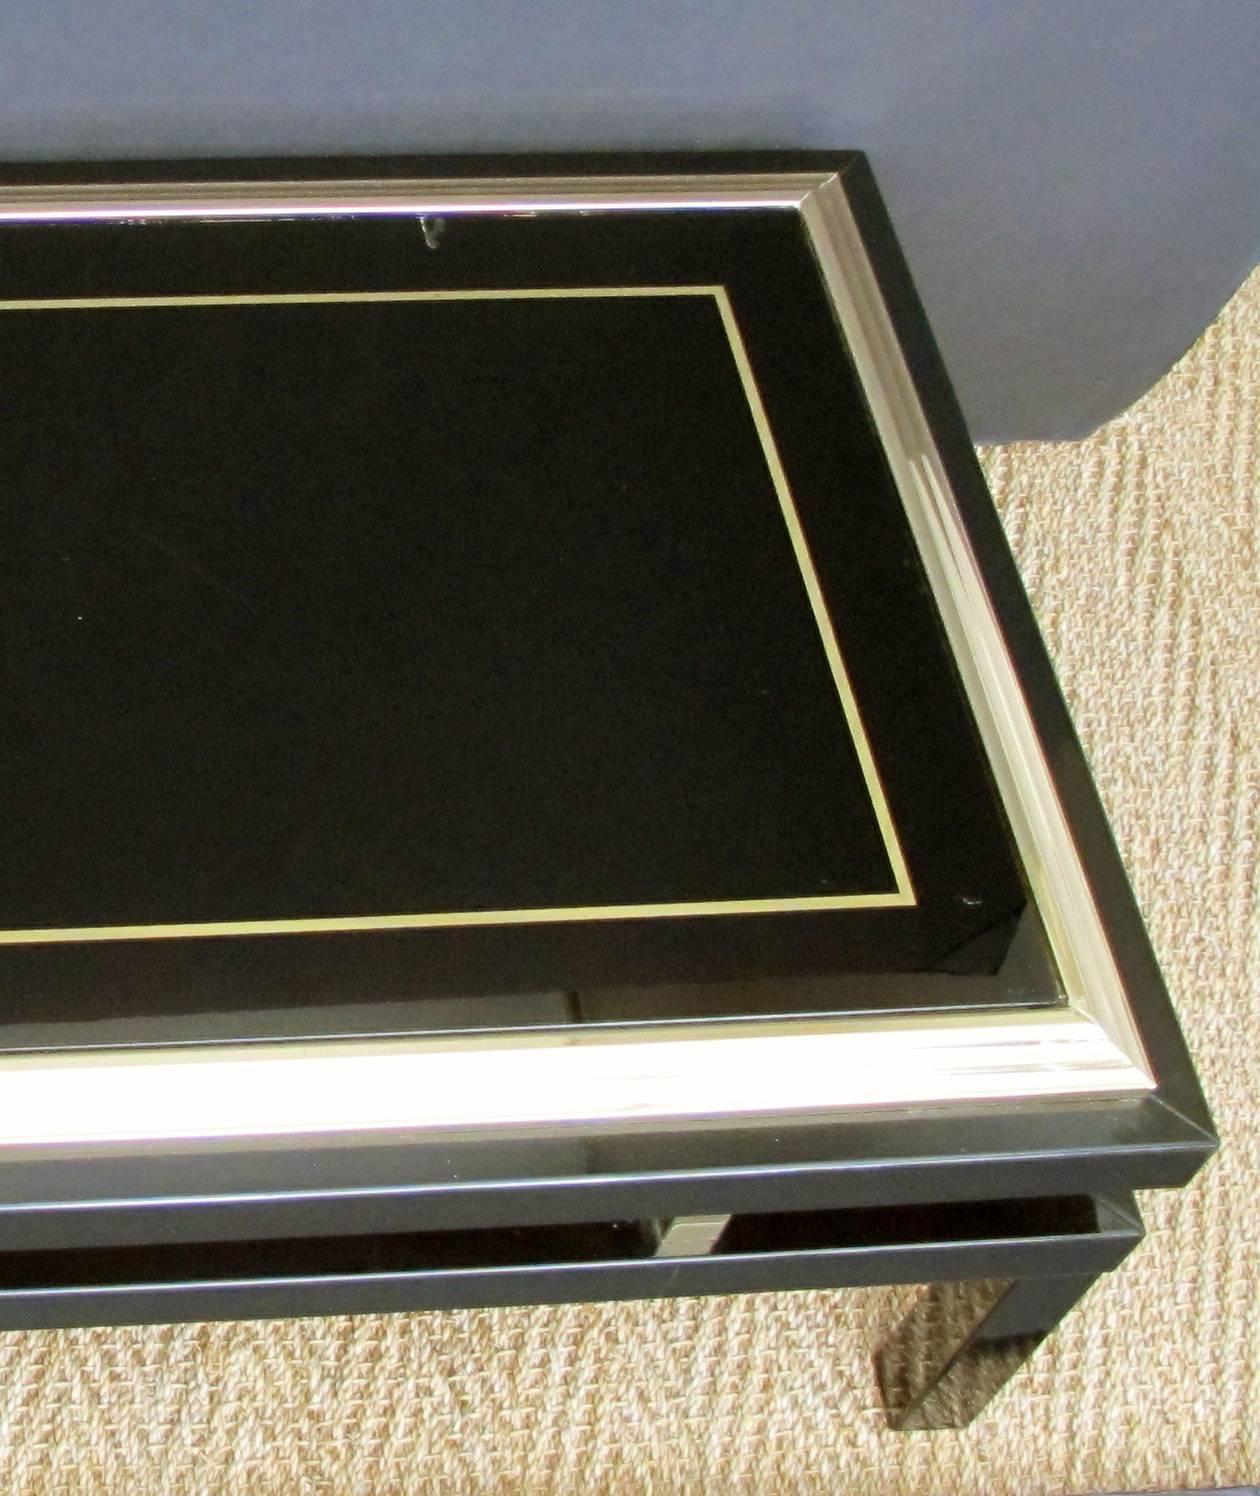 A stylish French 1970s black enameled metal rectangular coffee or cocktail table with brass detailing and églomisé glass top by Guy Lefevre for Maison Jansen; the black glass top with gold églomisé painted striping; within a stepped brass frame